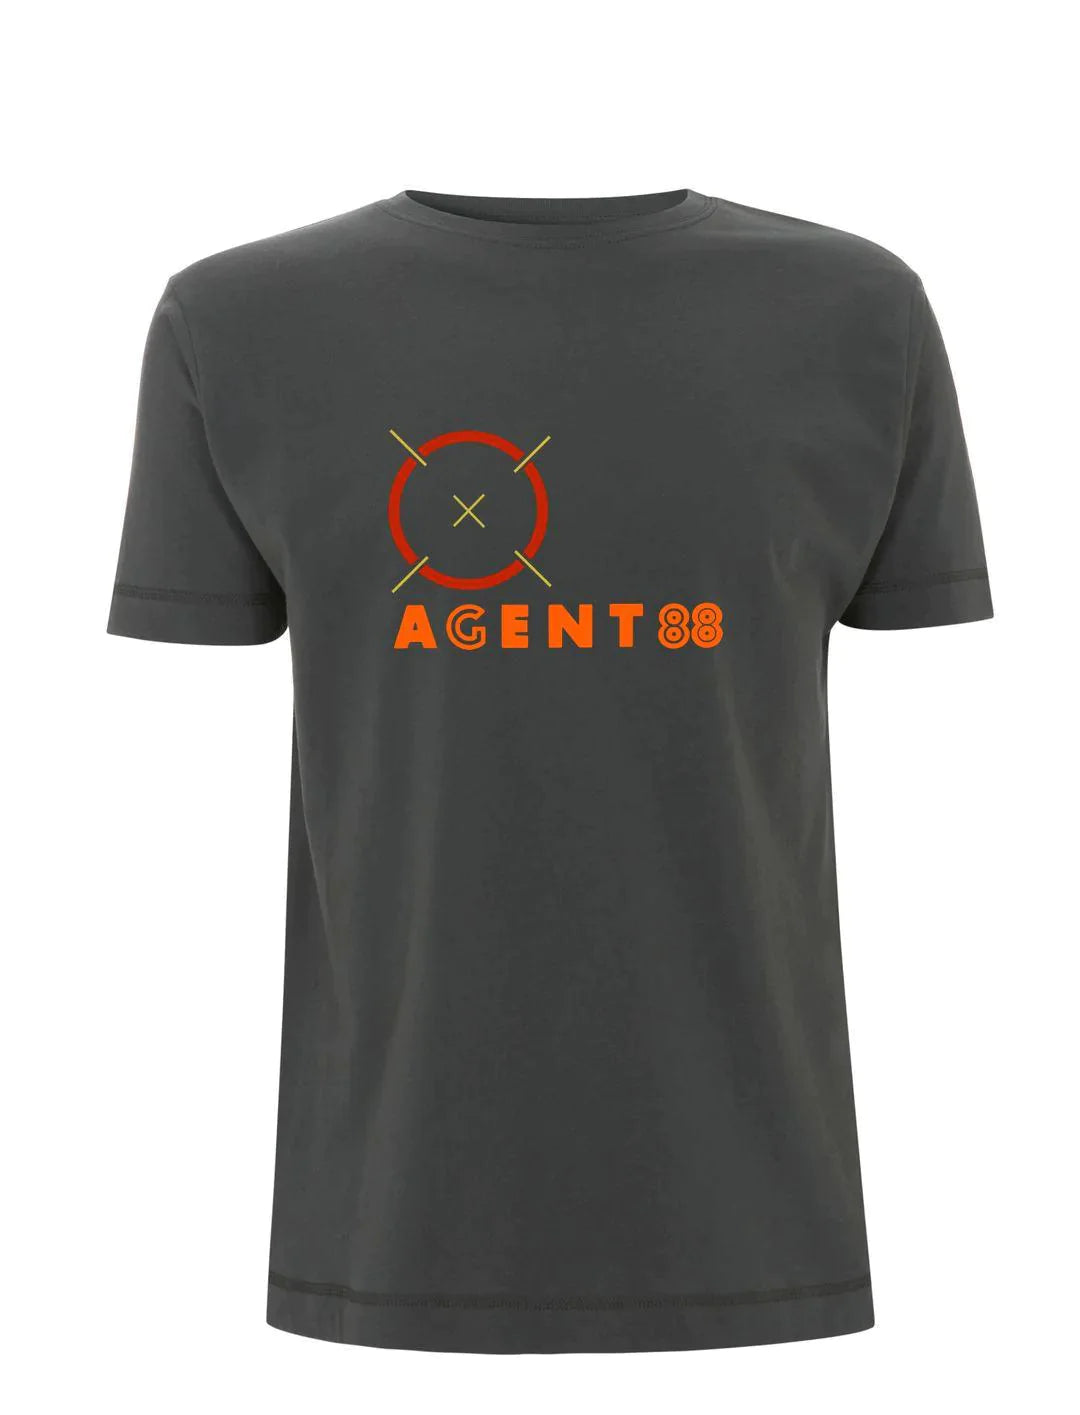 AGENT 88: T-Shirt Inspired by Mick Talbot of The Style Council (4 Colours) - SOUND IS COLOUR